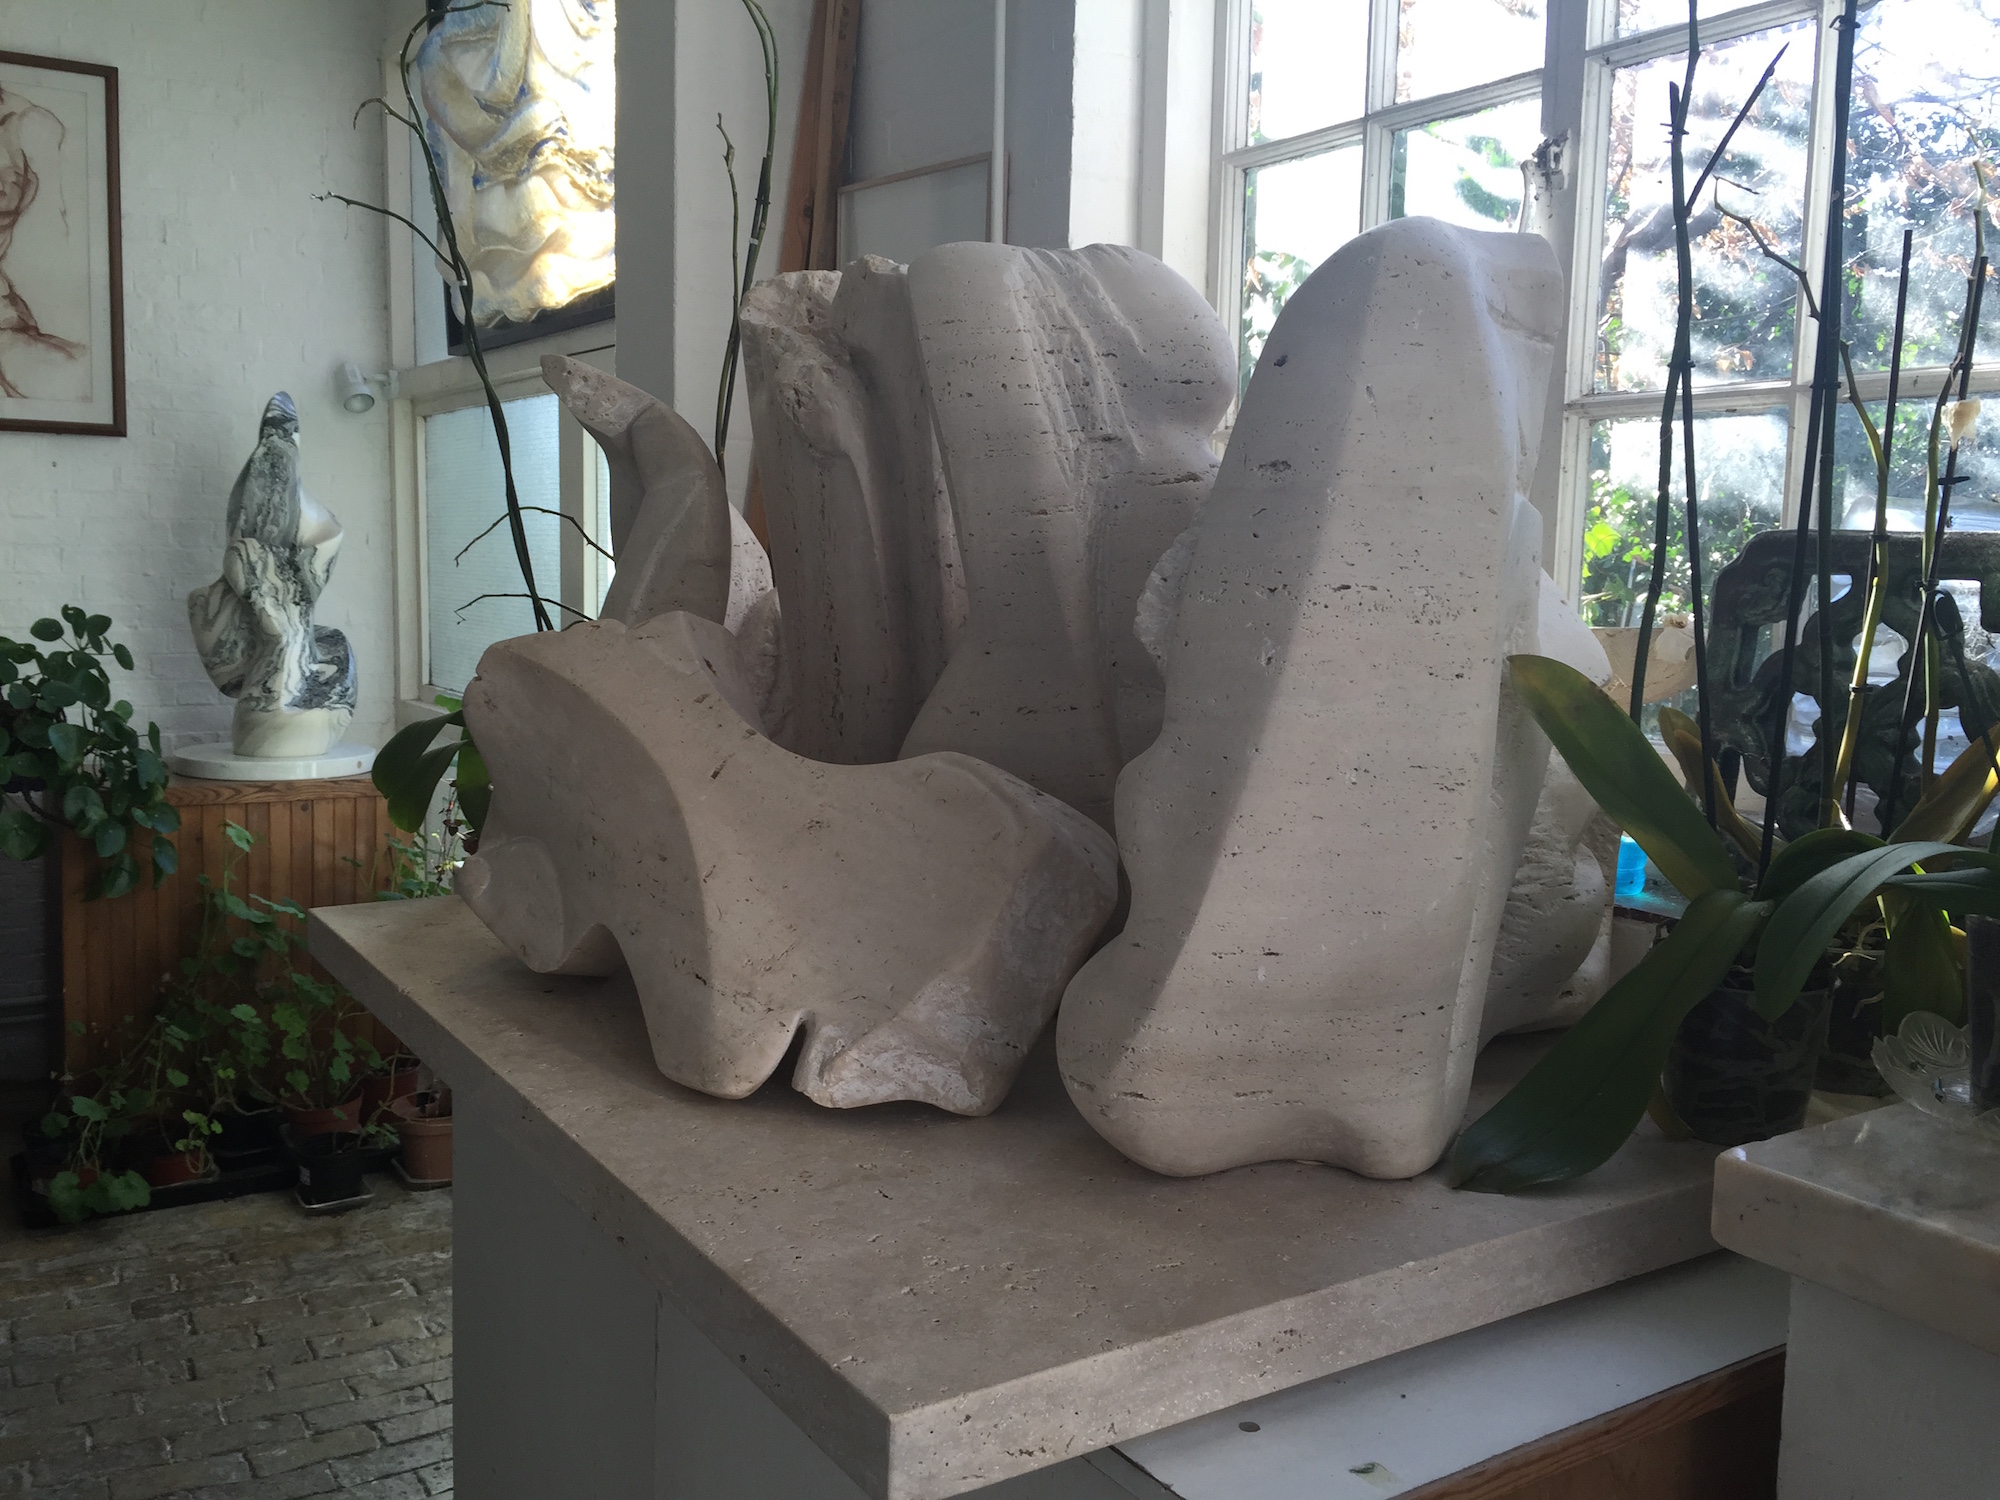 This work in Roman travertine, titled ‘Seascape,’ by Helaine Blumenfeld, will be shown at Bowman Sculpture in Duke Street from May 22 to June 30 where it will be among a number of works by Blumenfeld ‘in dialogue’ with works by Henry Moore. Image Auction Central News and courtesy Helaine Blumenfeld. 